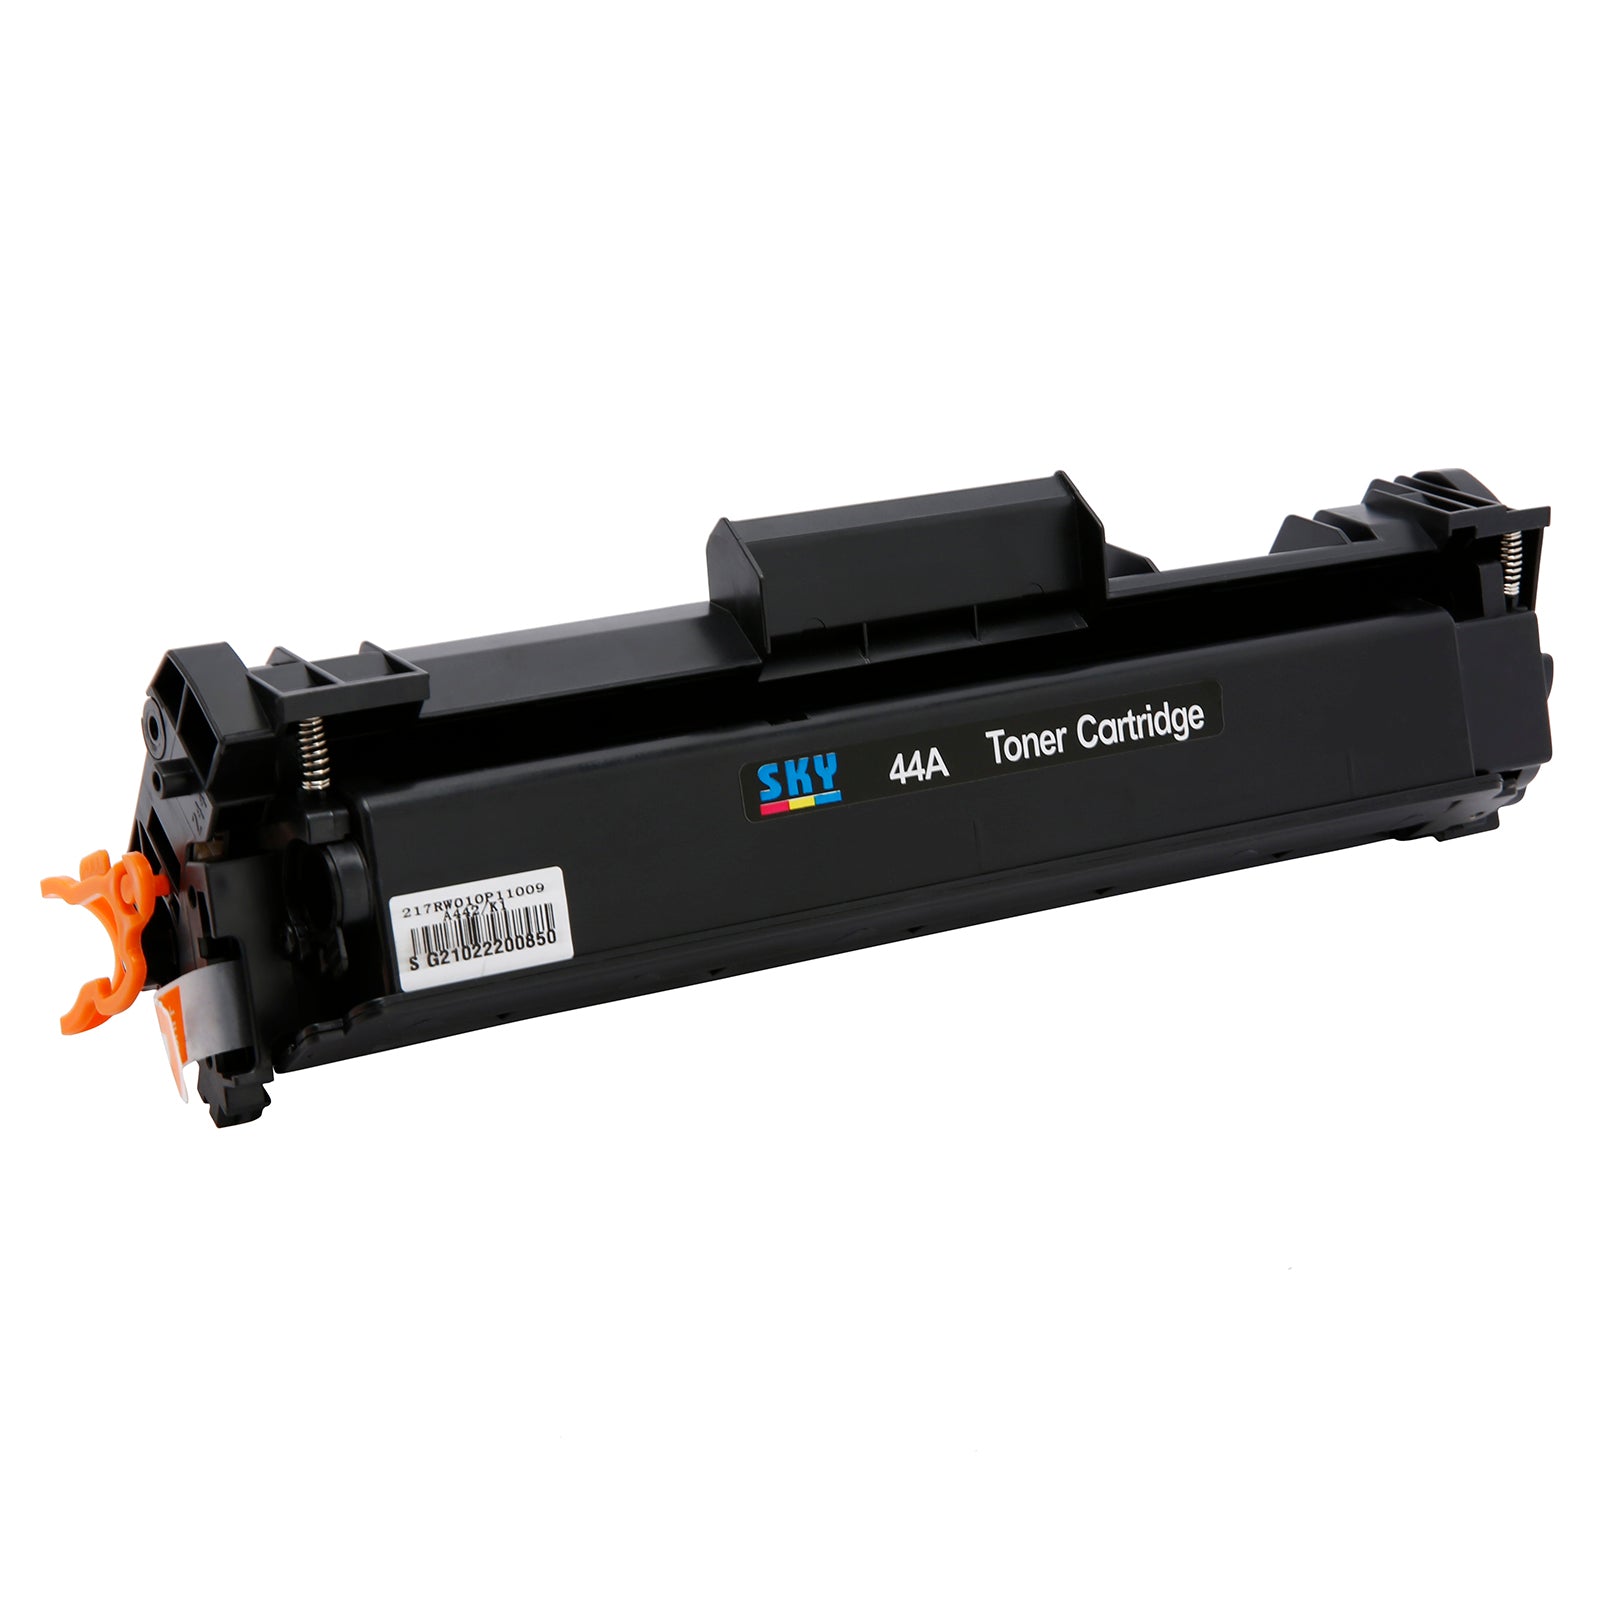 SKY 44A Toner Cartridge CF244A for M15 and MFP M28 Printers